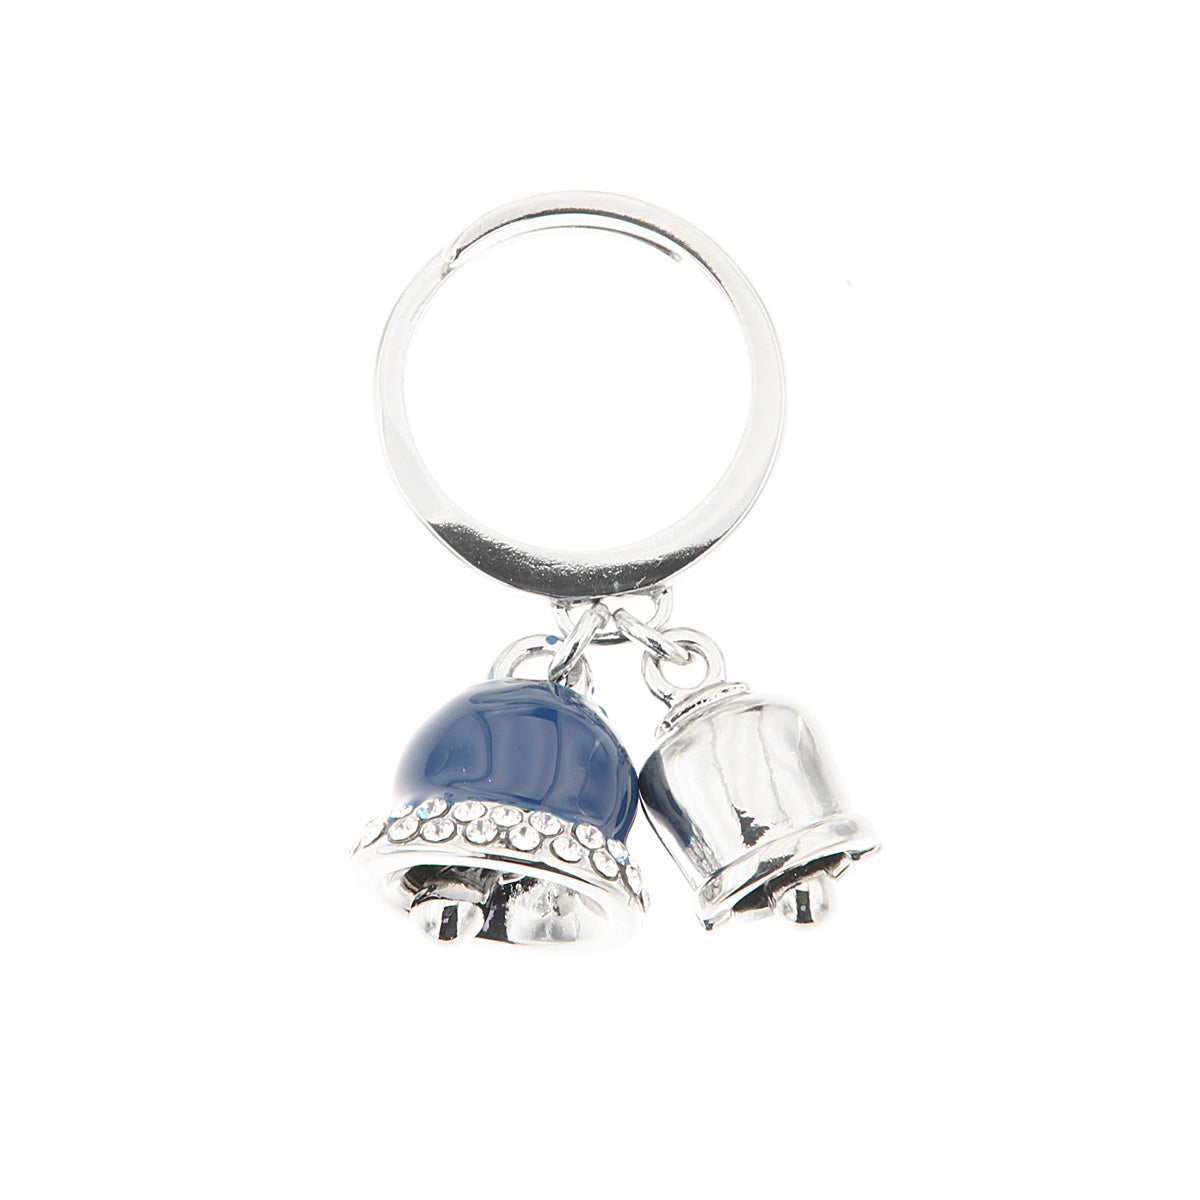 Metal ring with billet charms with blue glazing and white crystals